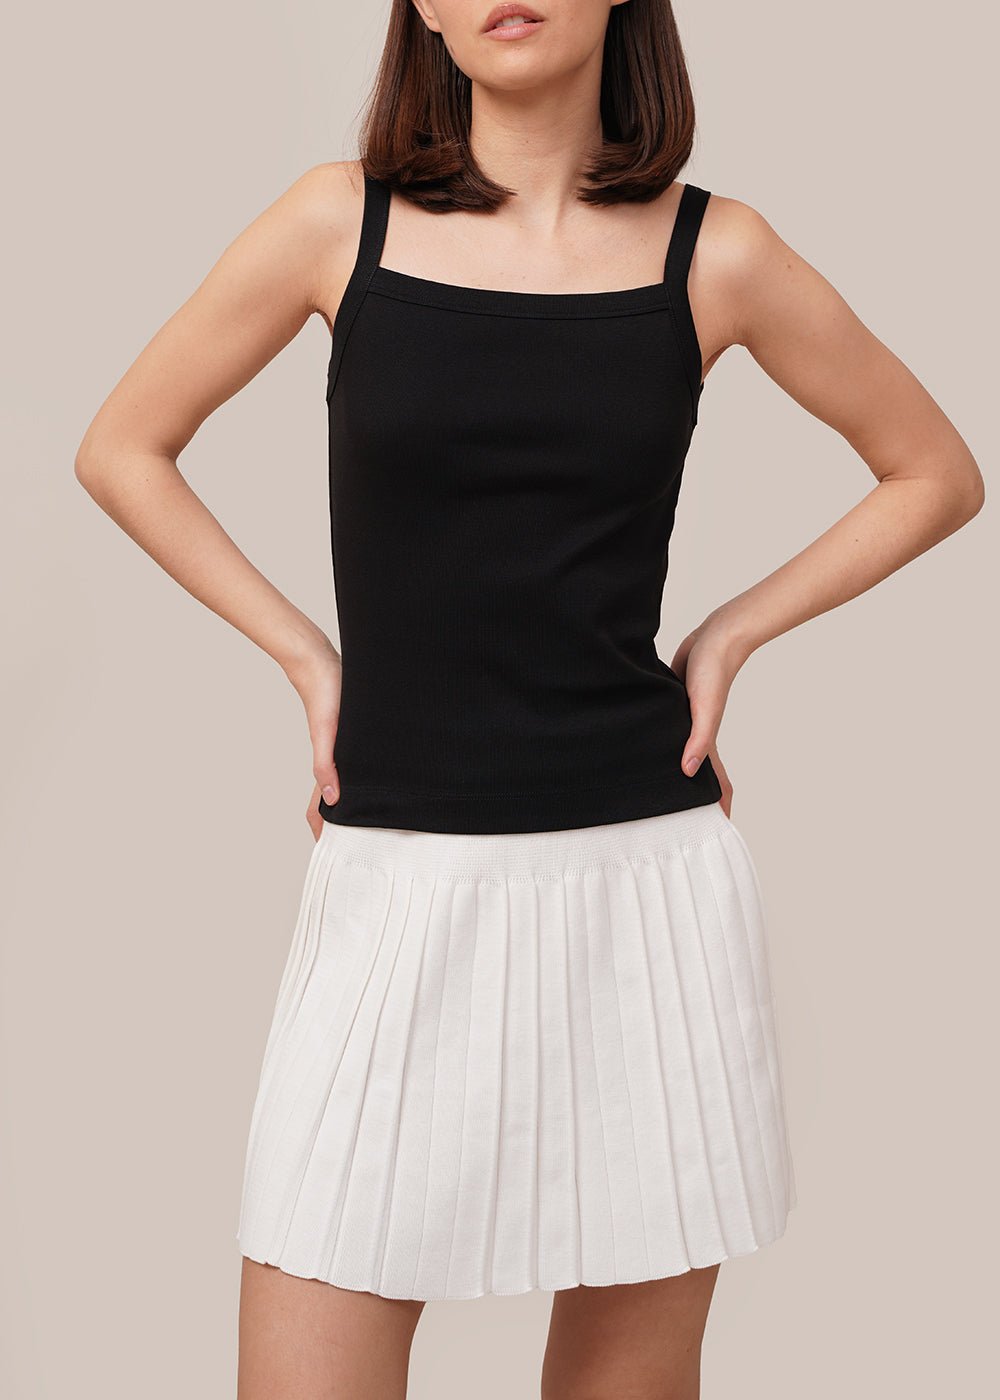 FLORE FLORE Black May Cami - New Classics Studios Sustainable Ethical Fashion Canada